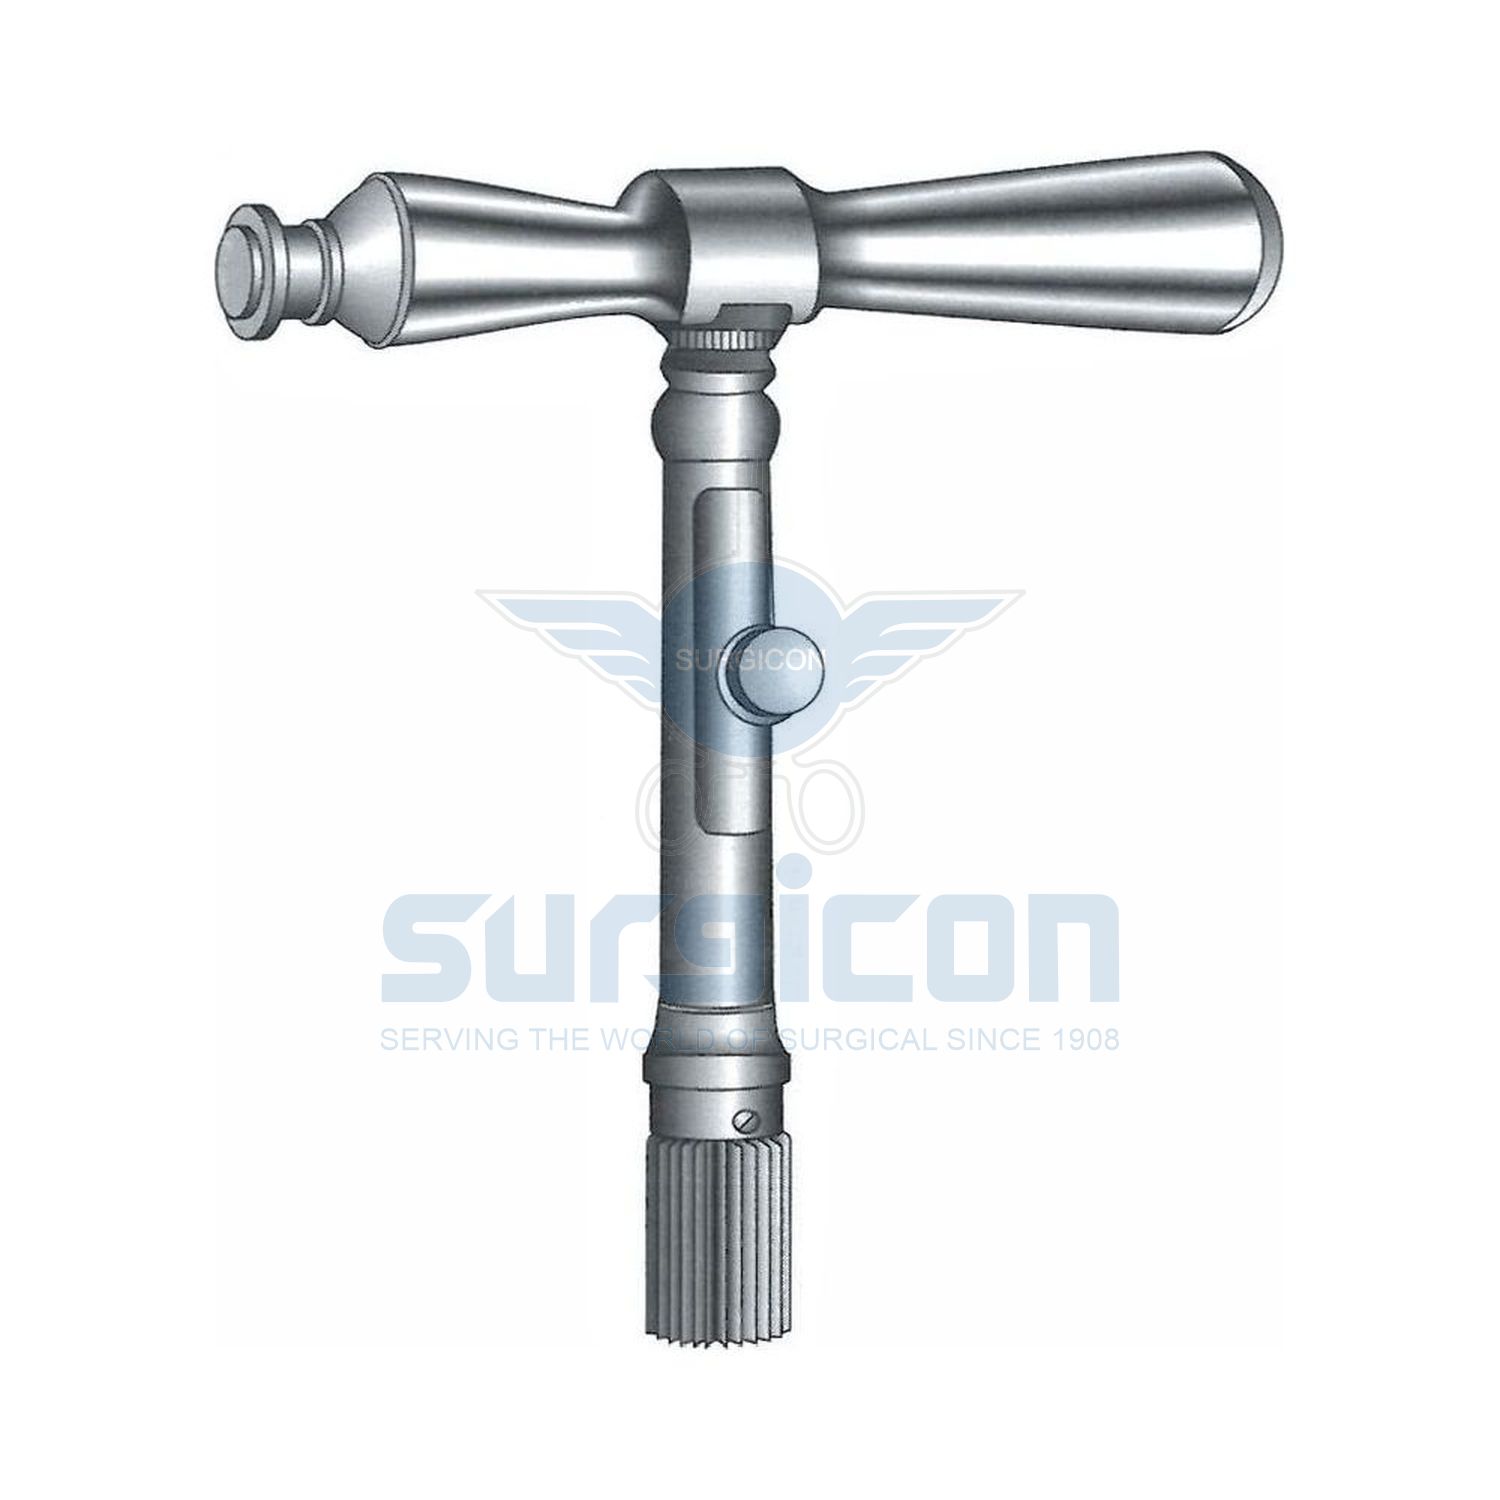 Hudson-Cervical-Traction-Tongs-and-Drill-Point-J-25-054